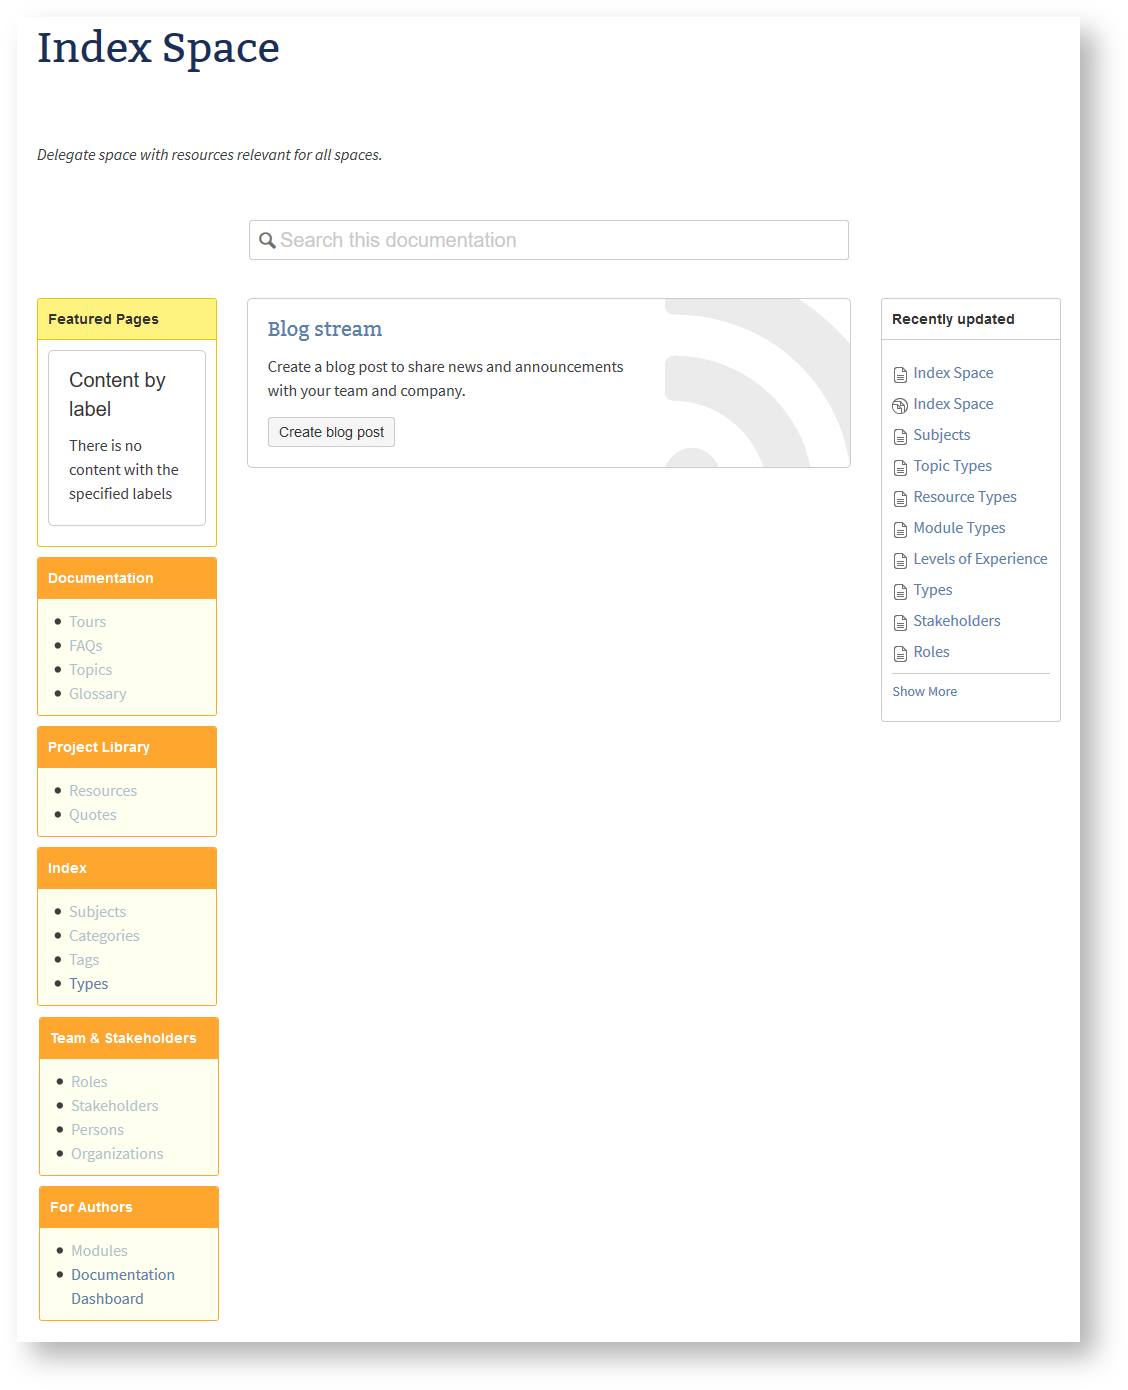 The new index space provides homepages to categorizing documents that are relevant to all your spaces.